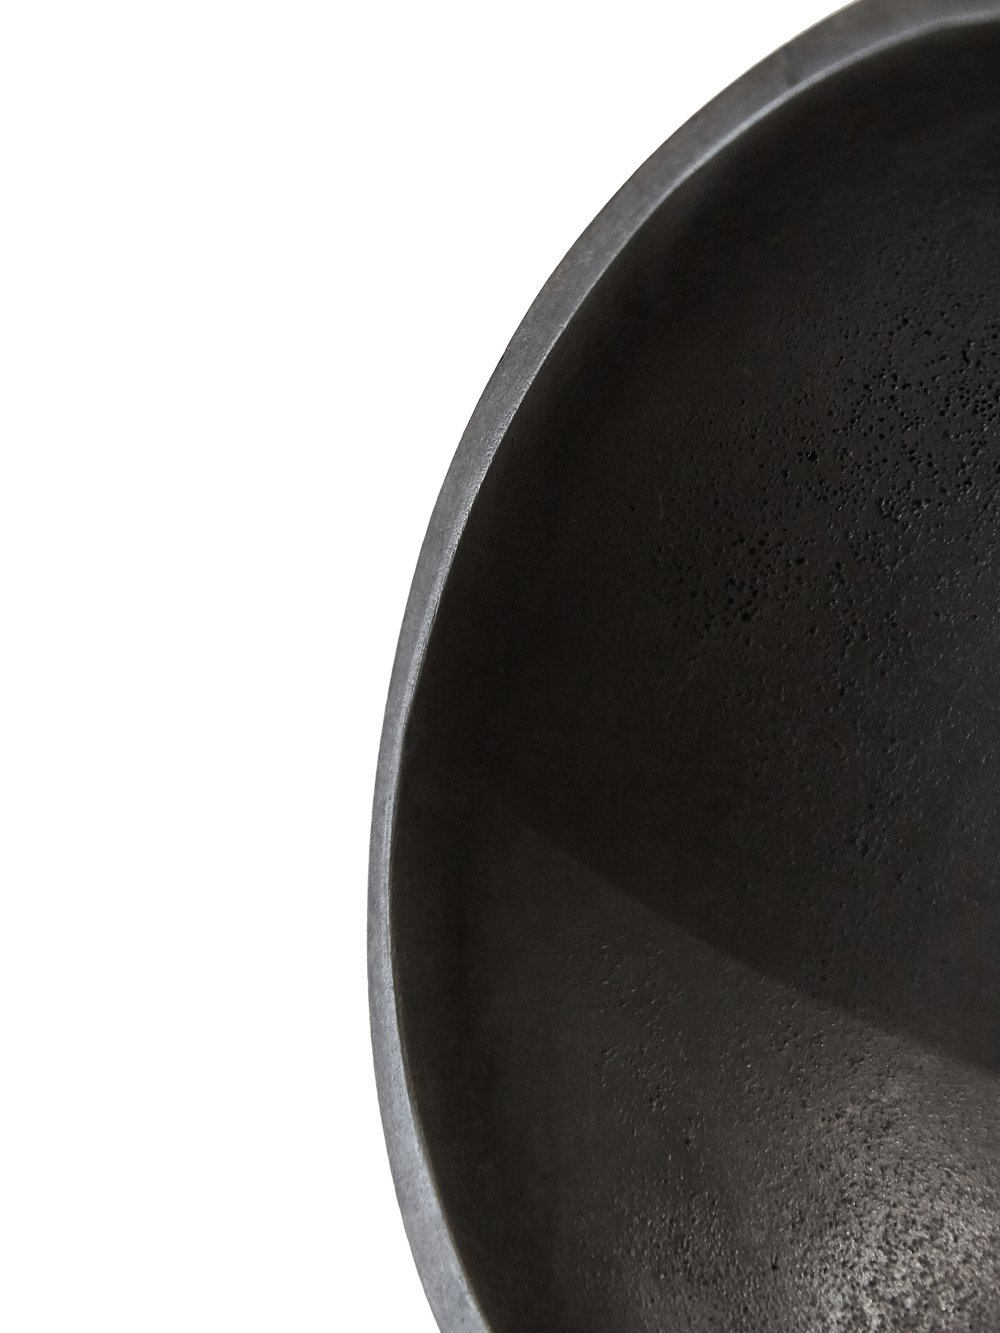 RICK OWENS BOWL HAS A ROUND SHAPE AND FEATURES A SMALL TRIANGLE DETAIL AND POLISHED SURFACE.